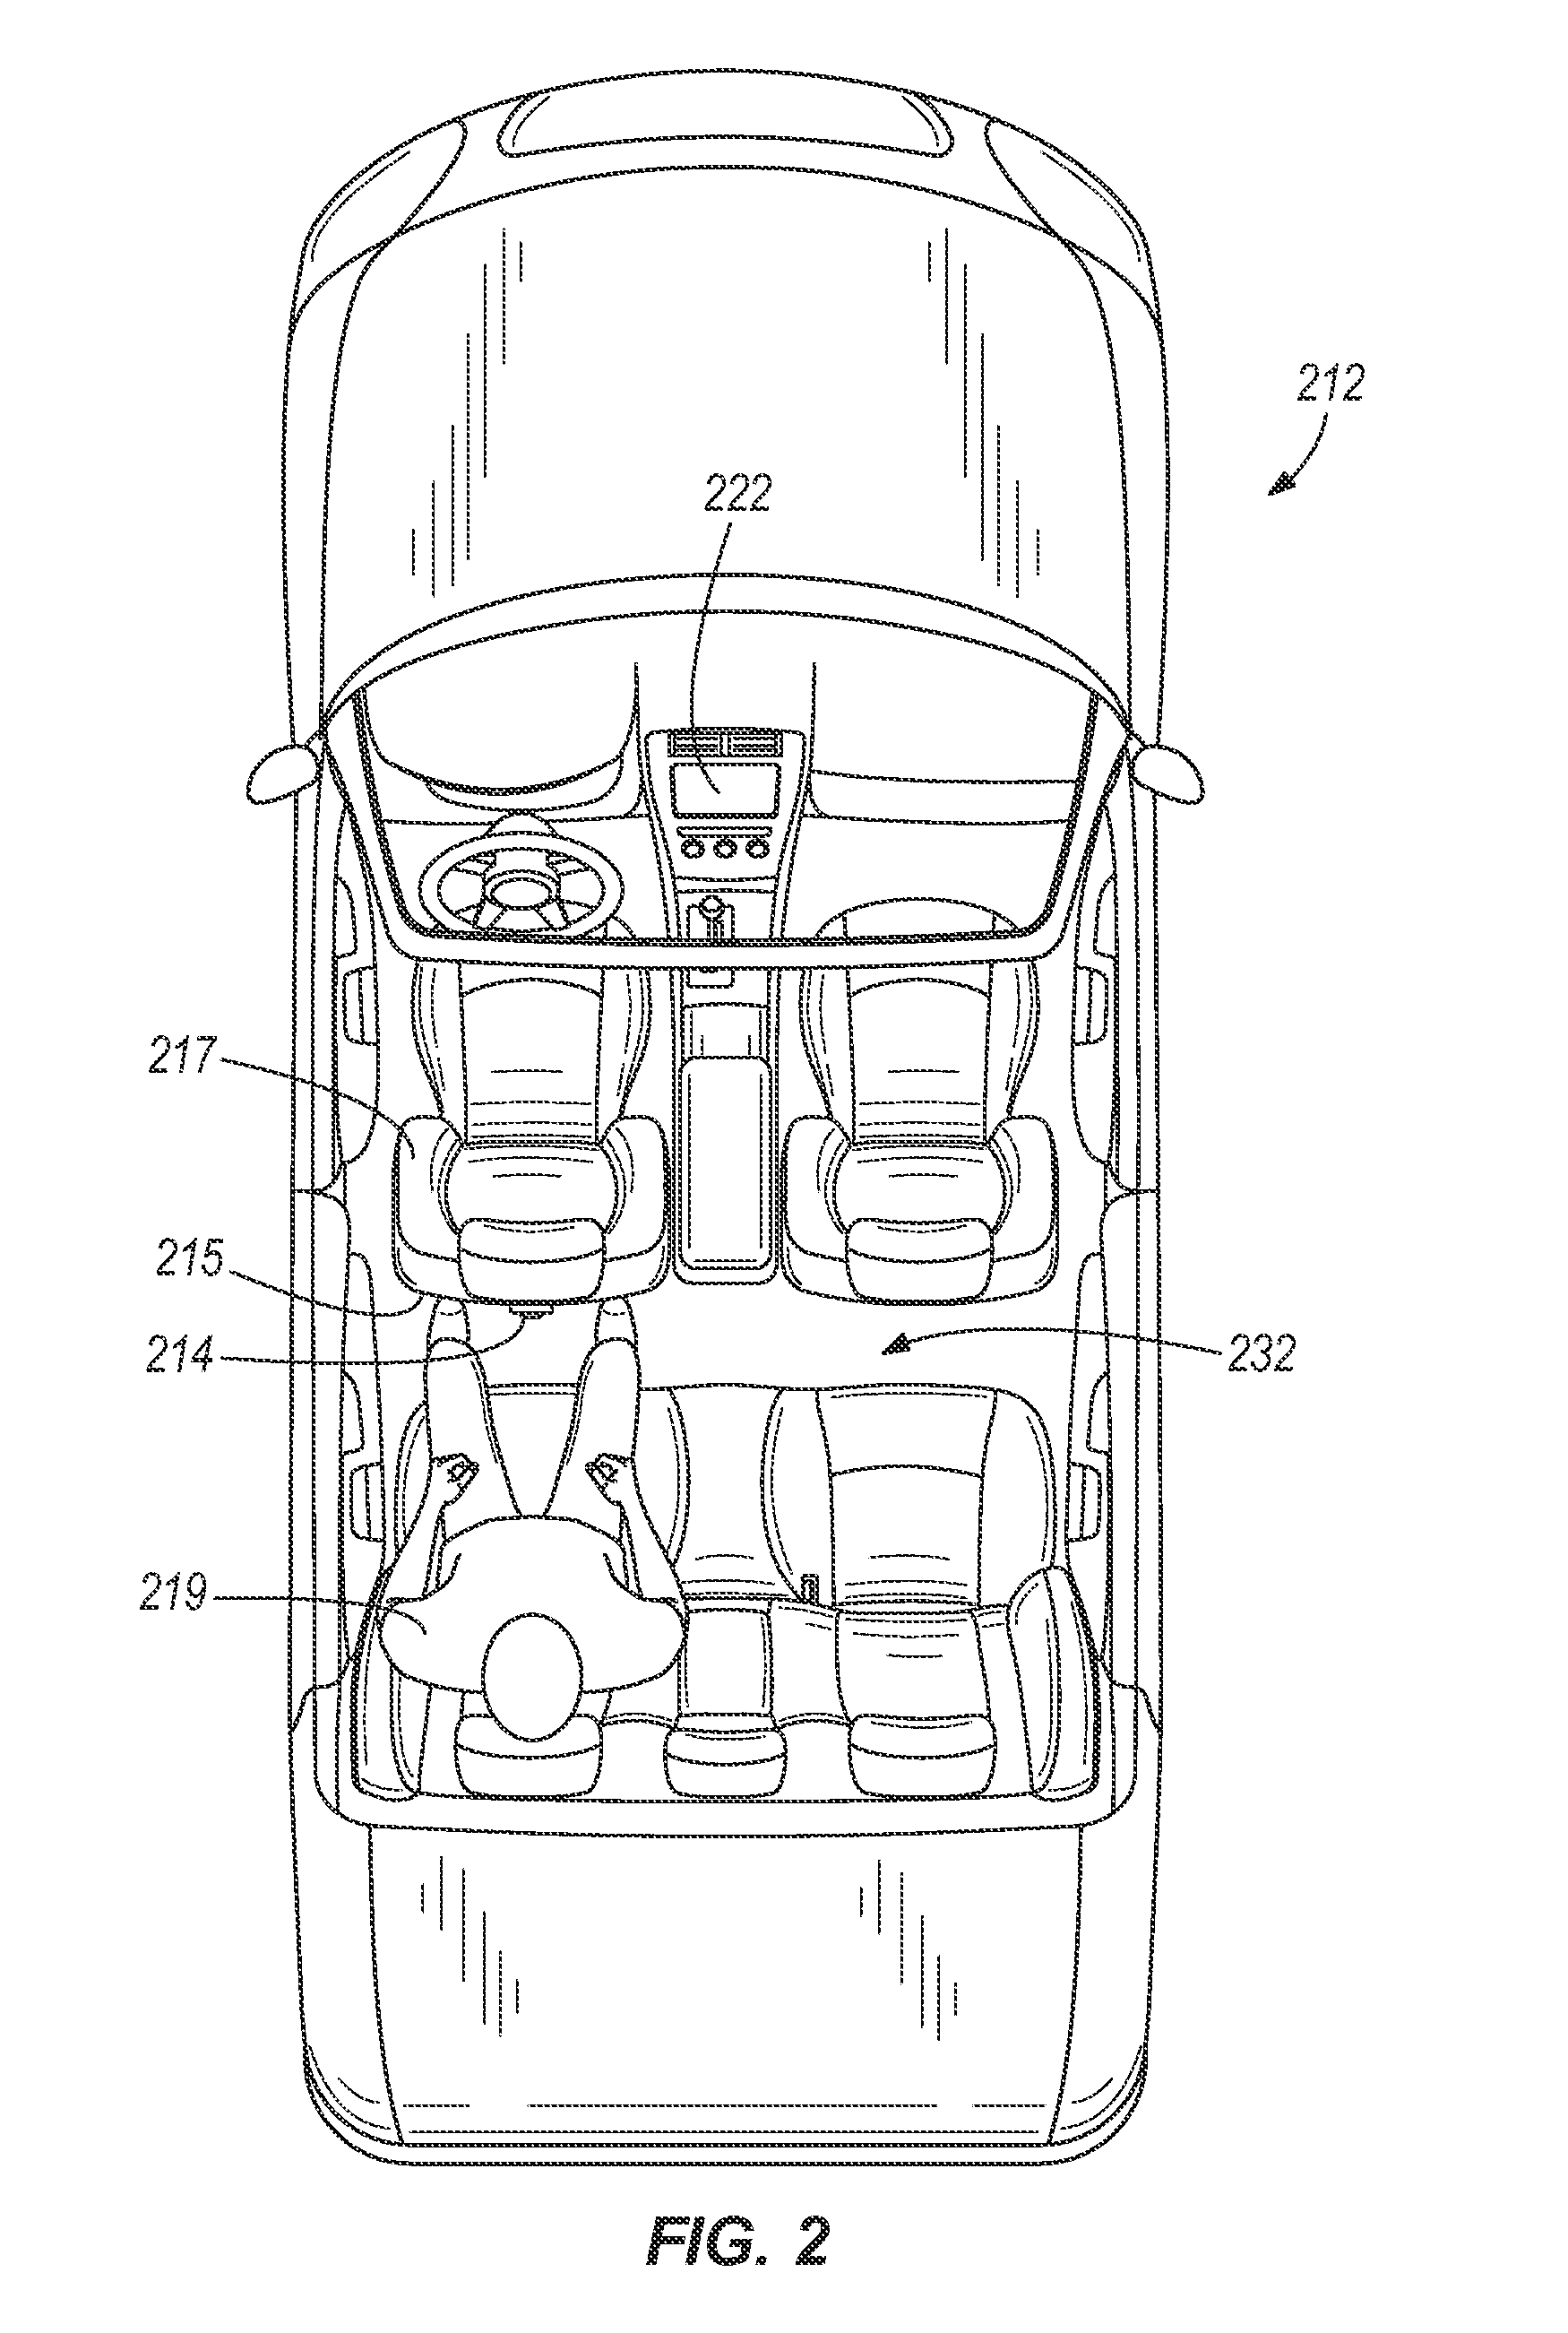 Mobile device wireless camera integration with a vehicle